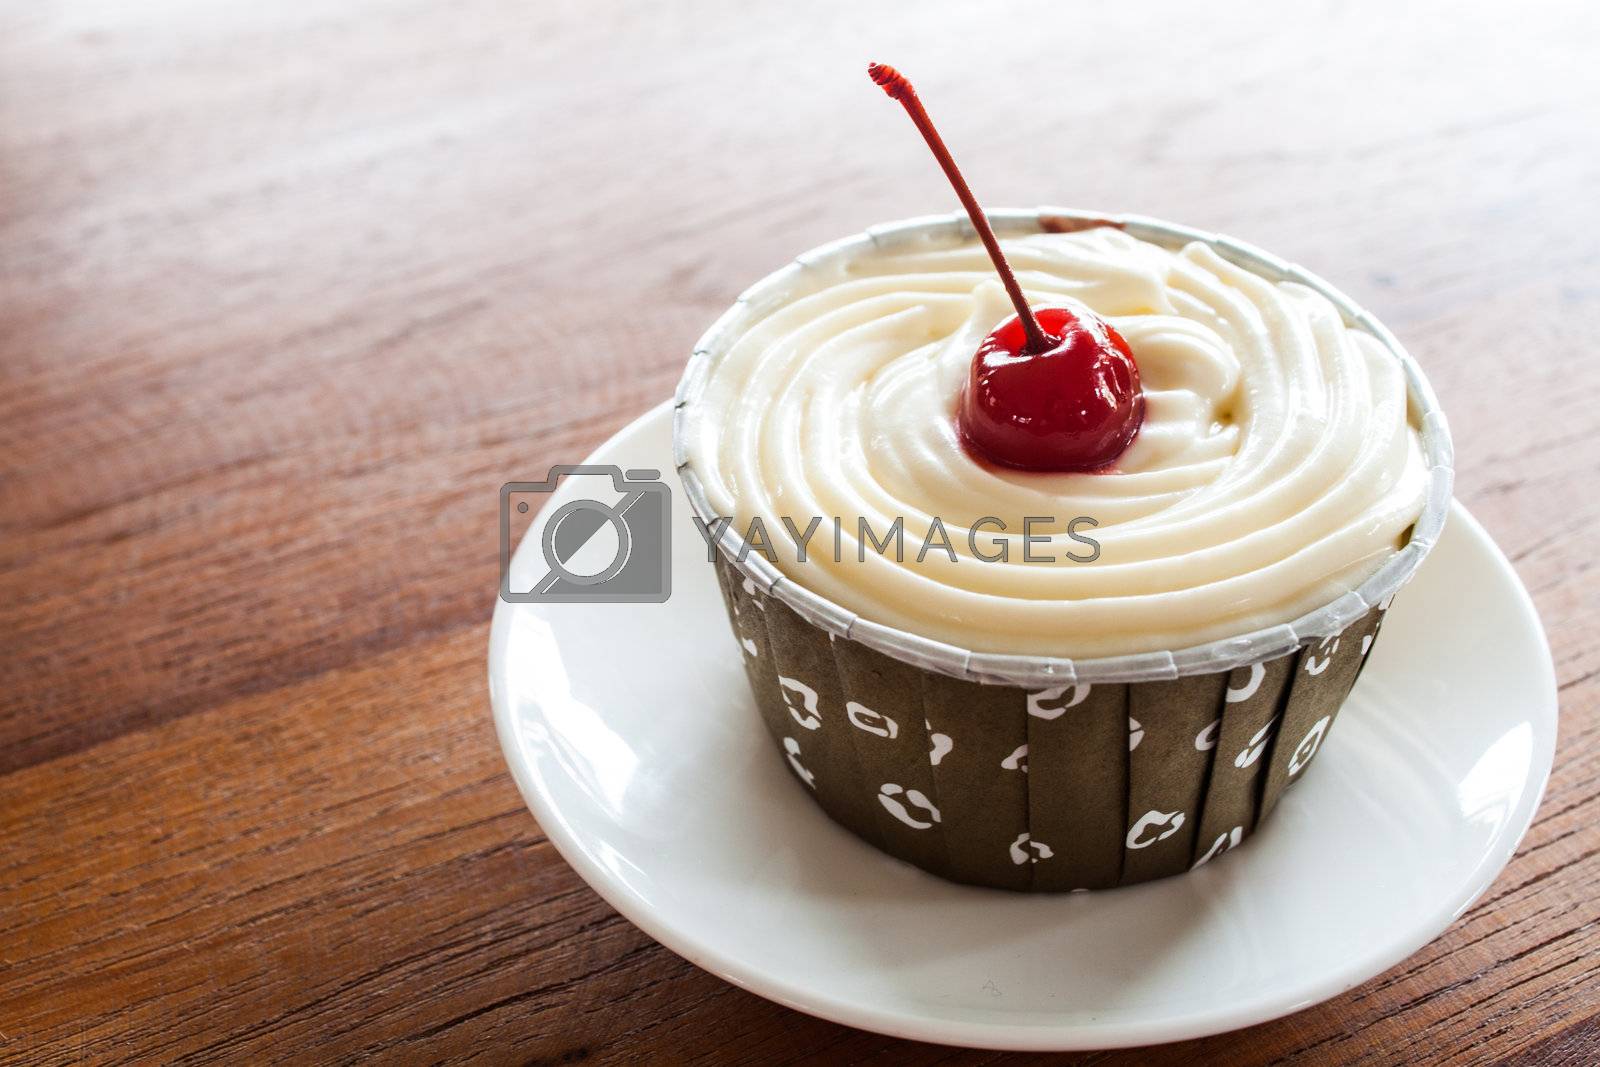 Royalty free image of Cupcake with red cherry on white plate by punsayaporn